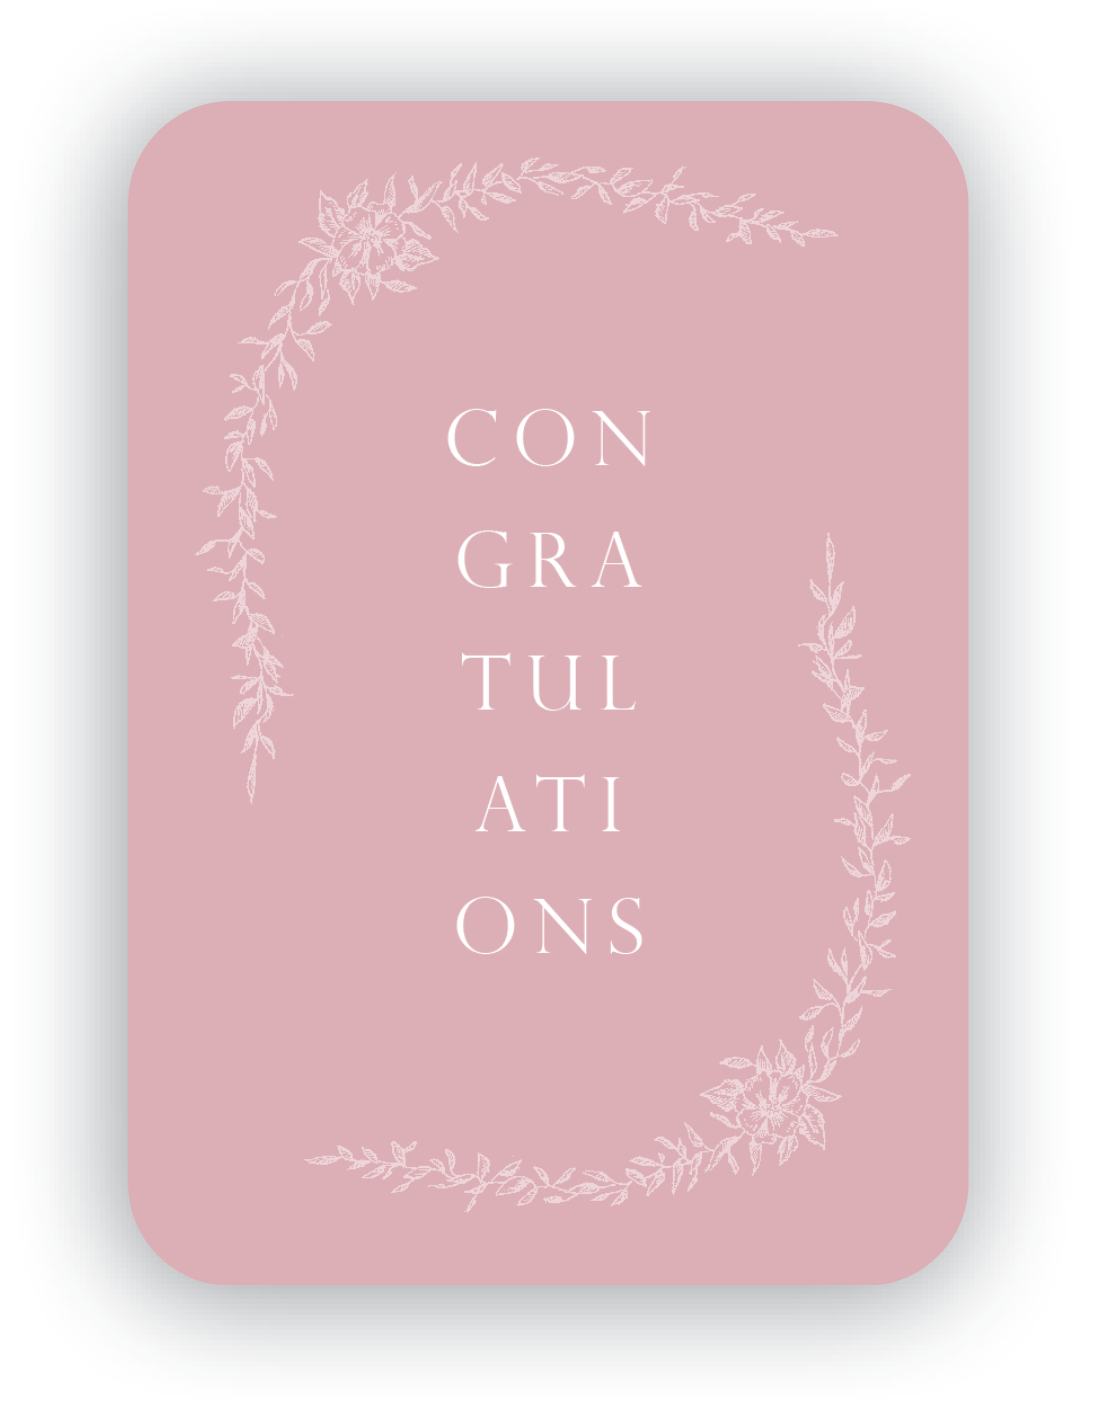 Digital blush mini card with florals that says " Congratulations" by Rust Belt Love